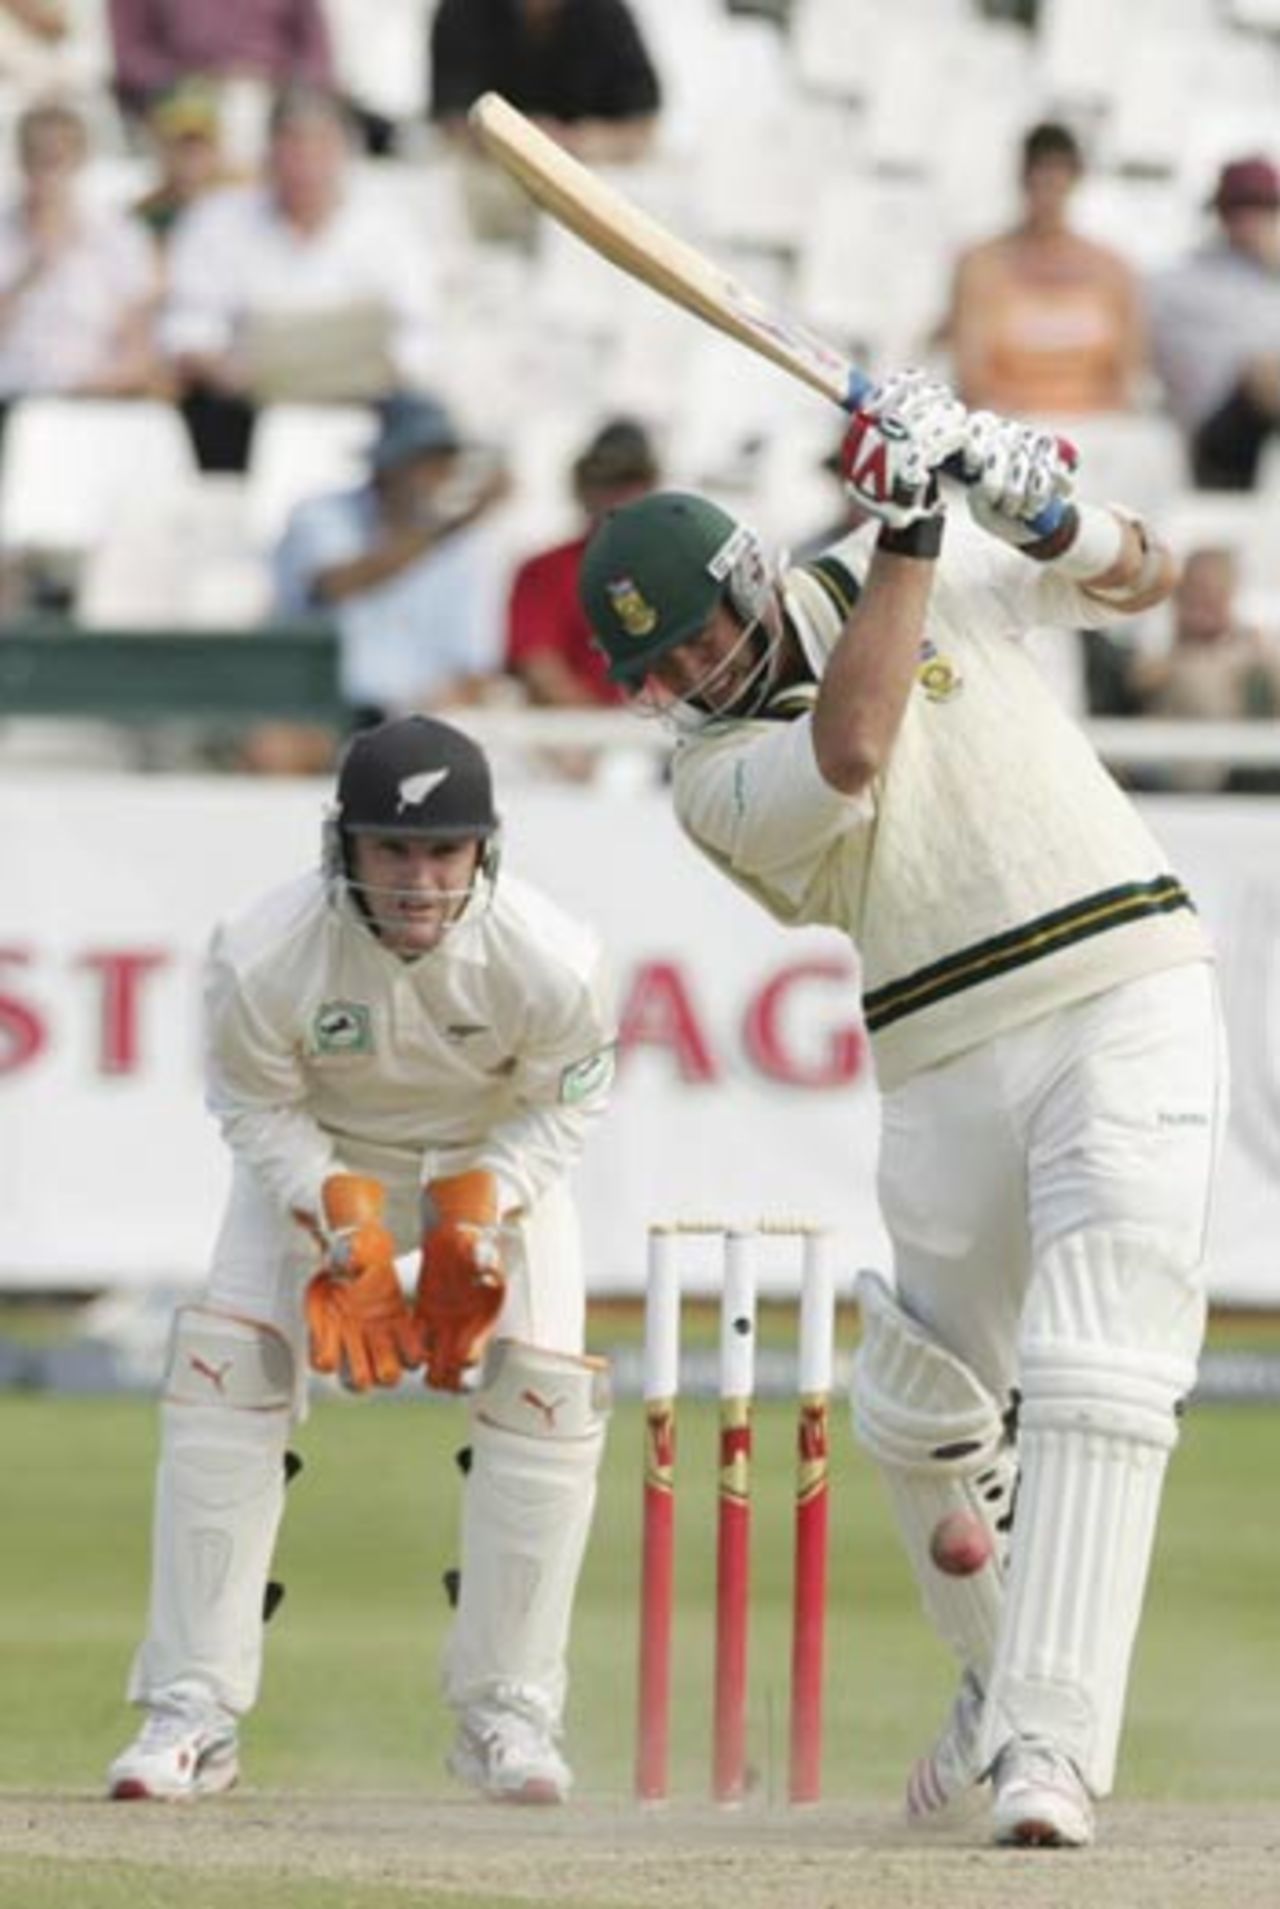 Jacques Kallis strikes a powerful drive during the third day, South Africa v New Zealand, 2nd Test, Cape Town, April 29, 2006